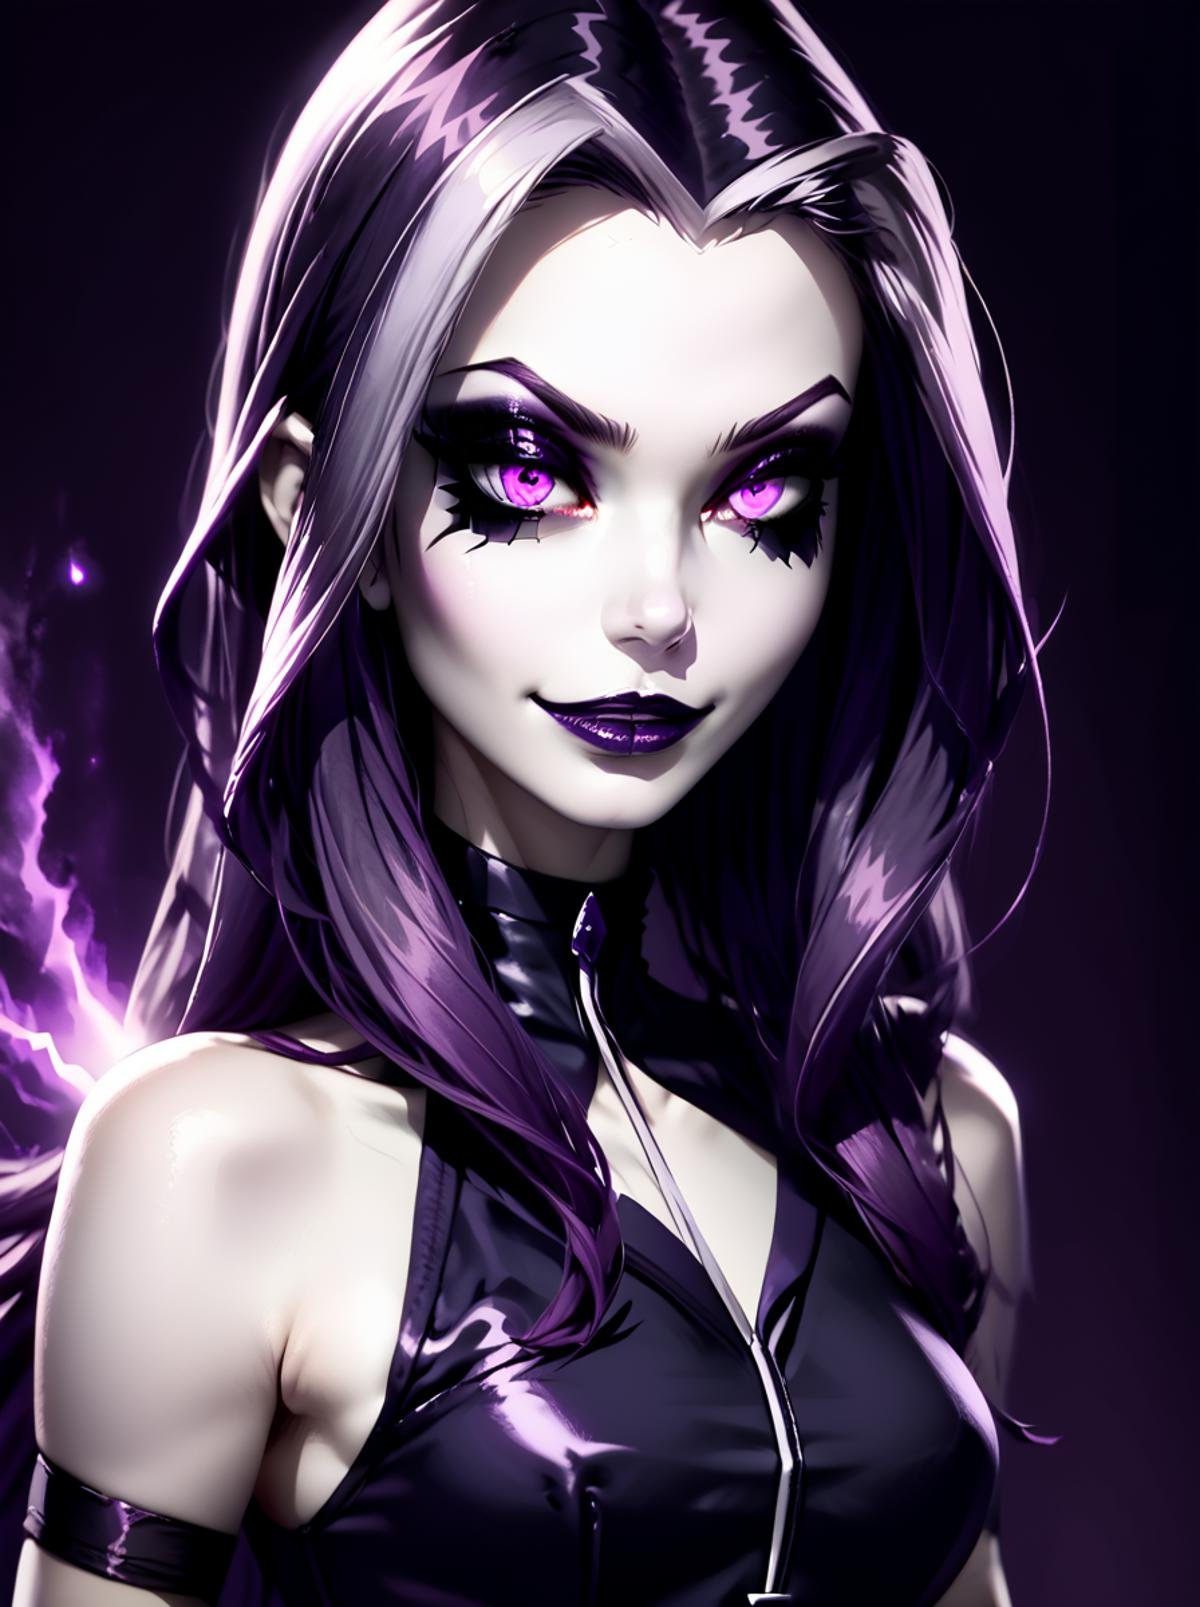 score_9, score_8_up, score_7_up, source_photo, realistic,  <lora:WinxAndTrixPony:0.8>,winxtrix,Darcy,1 girl, solo, long wavy dark purple hair, violet eyes, wearing a dark purple gothic outfit with a high collar, gothic style, slender build, mischievous smile, pale skin, mysterious aura, dark magic.,<lora:Ghotic_haunted_world:0.6>